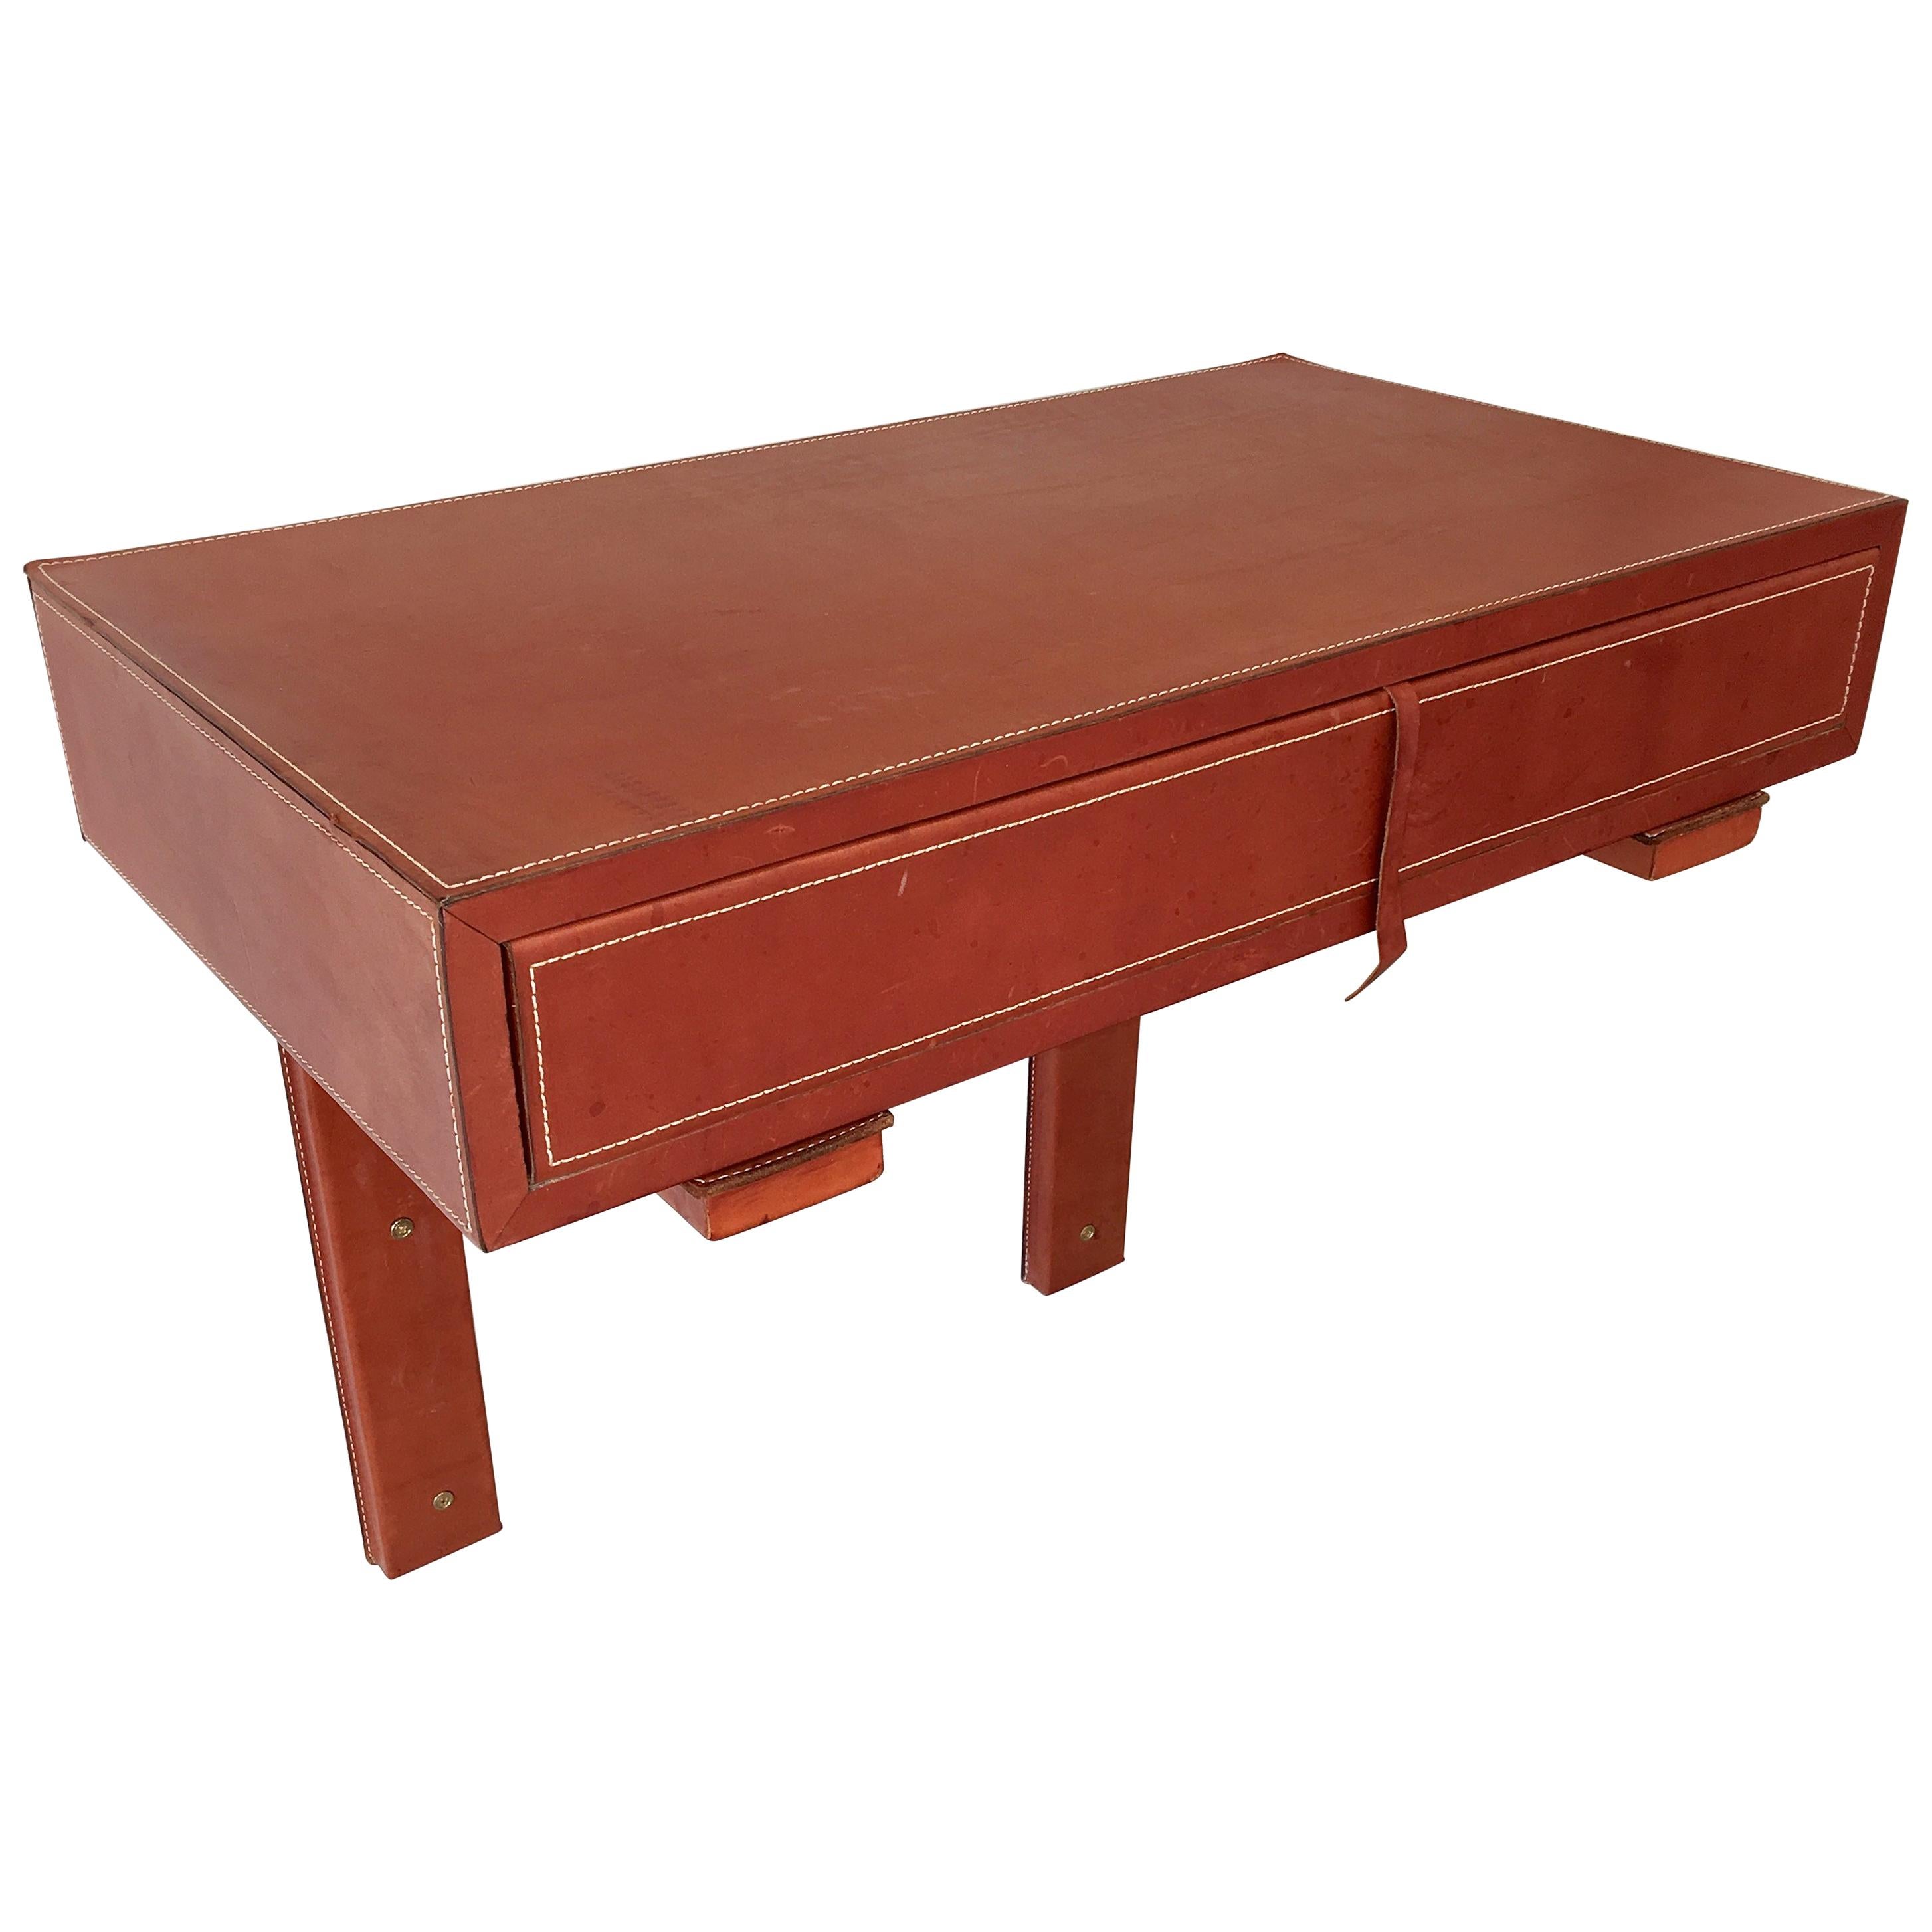 Adnet Style Saddle Stitched Leather Cantilevered Wall Console For Sale